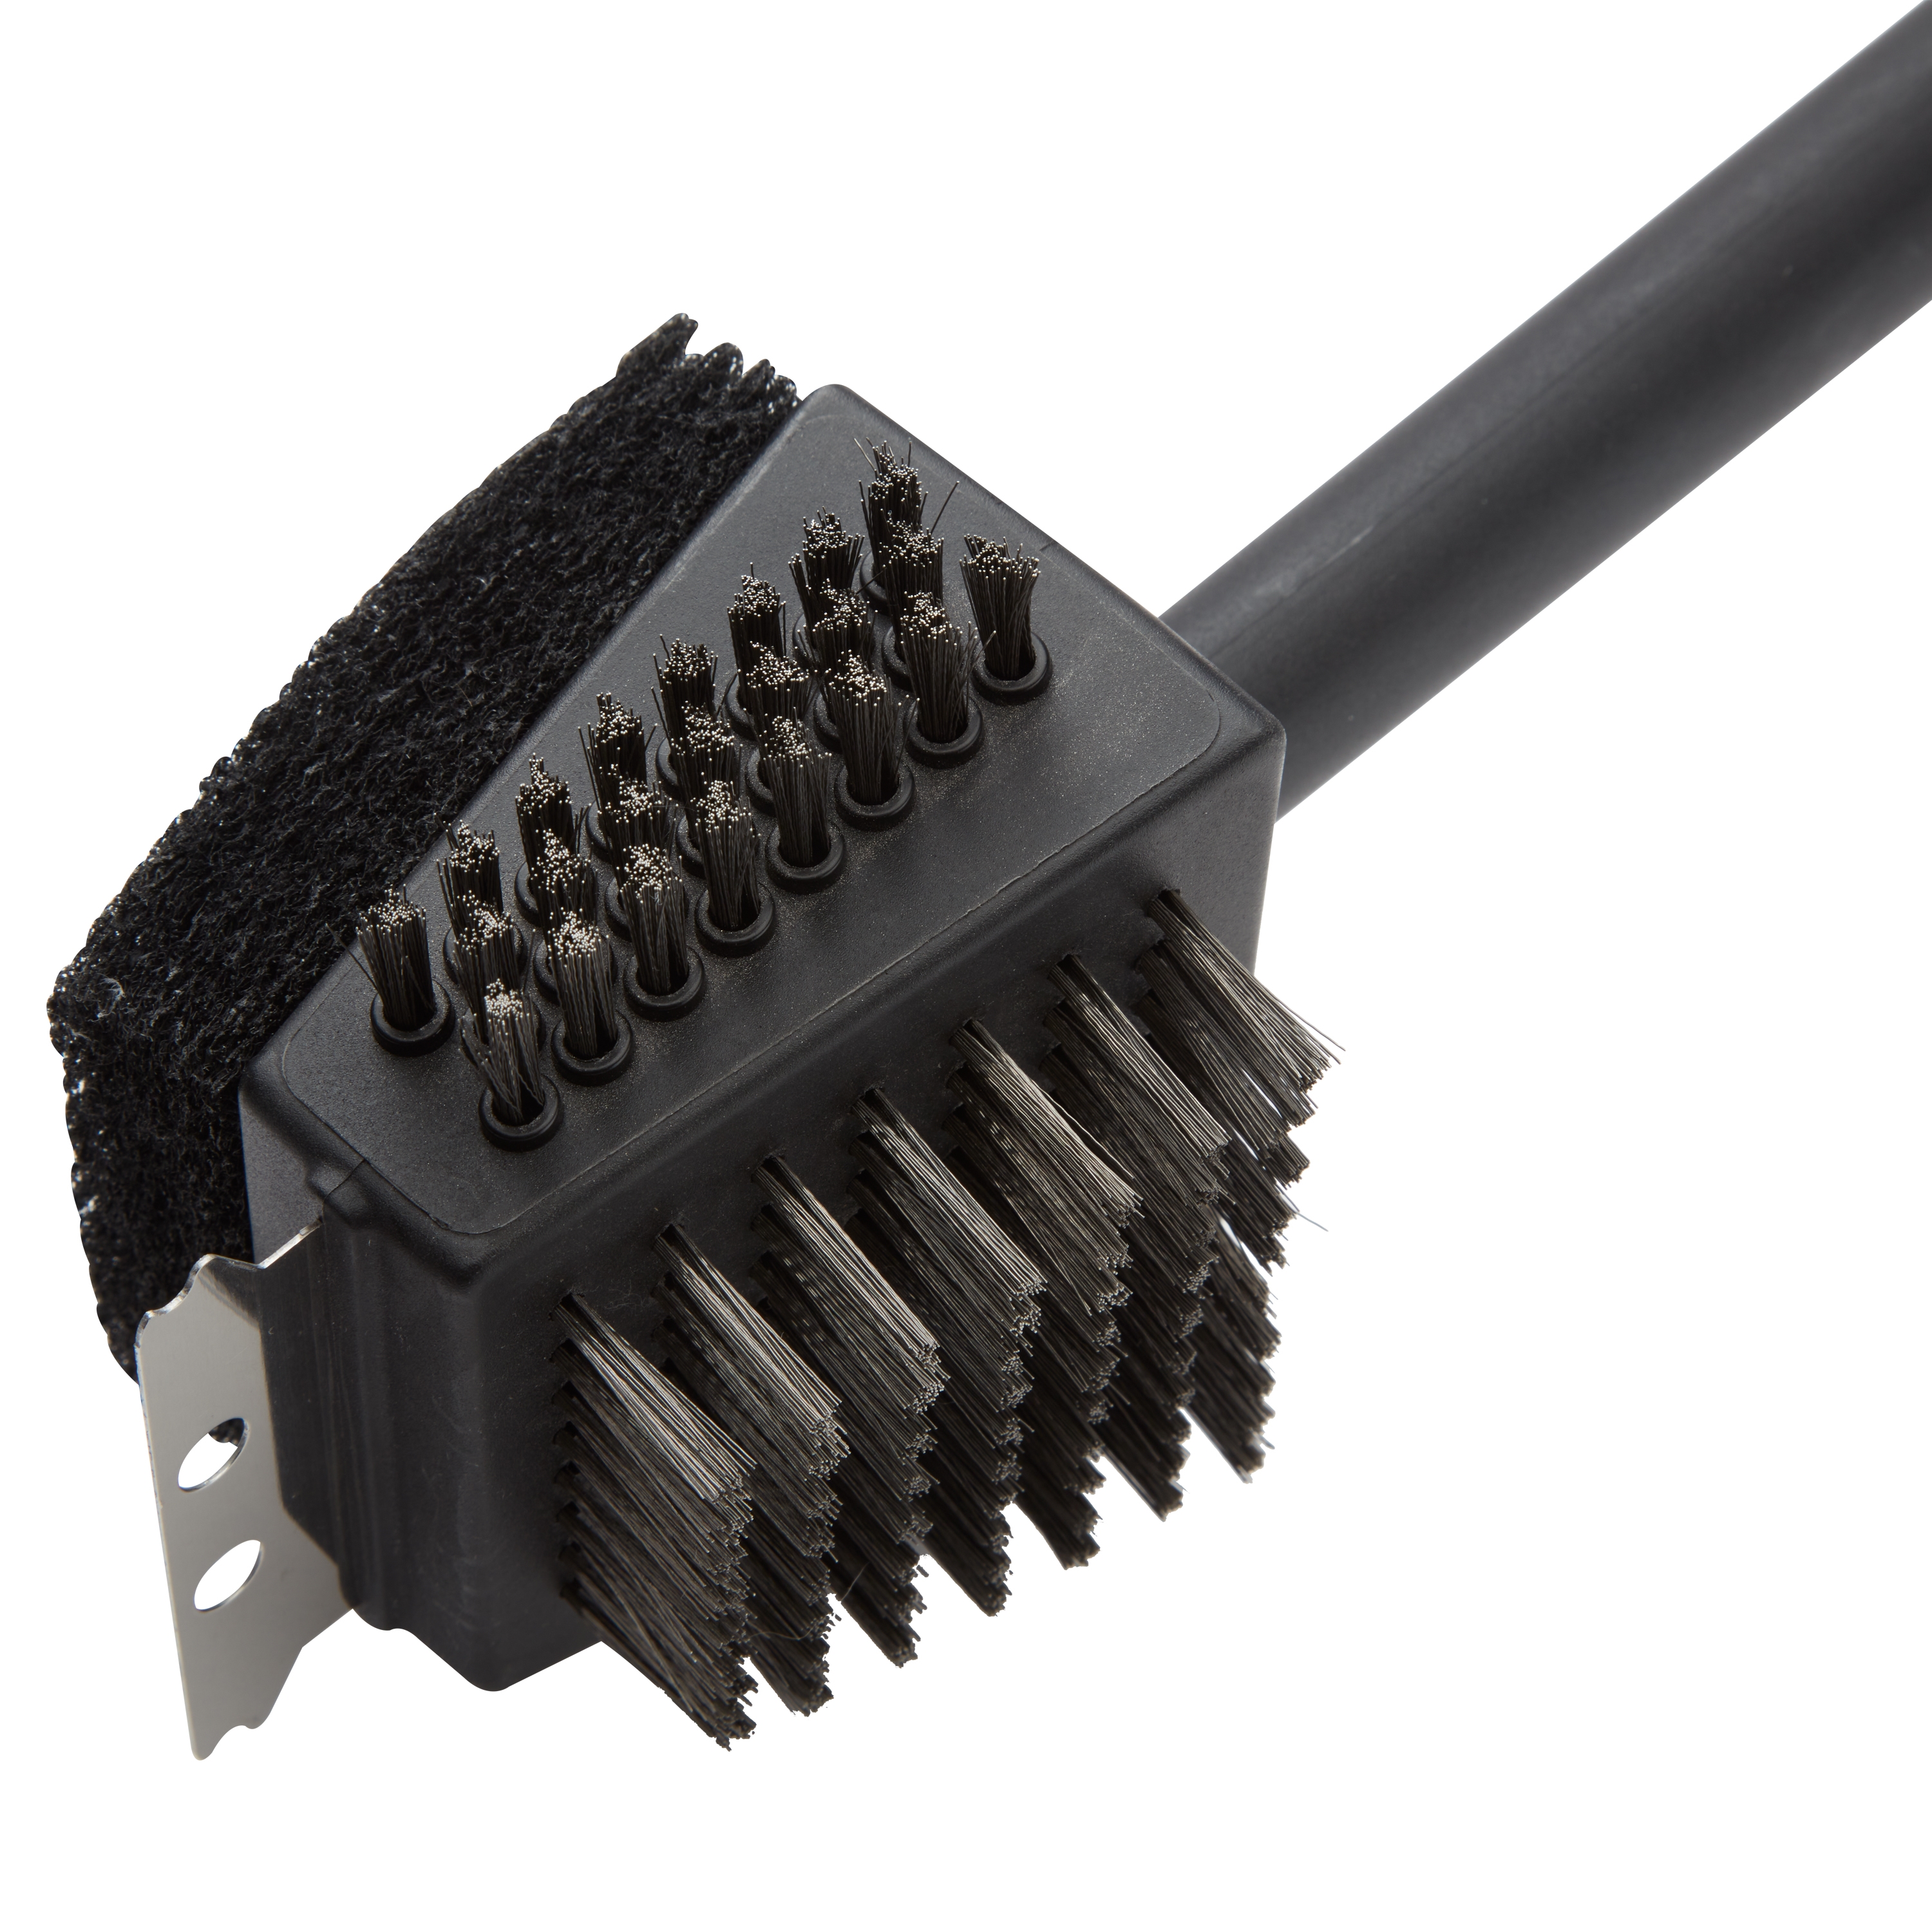 4-in-1 Grill Cleaning Brush